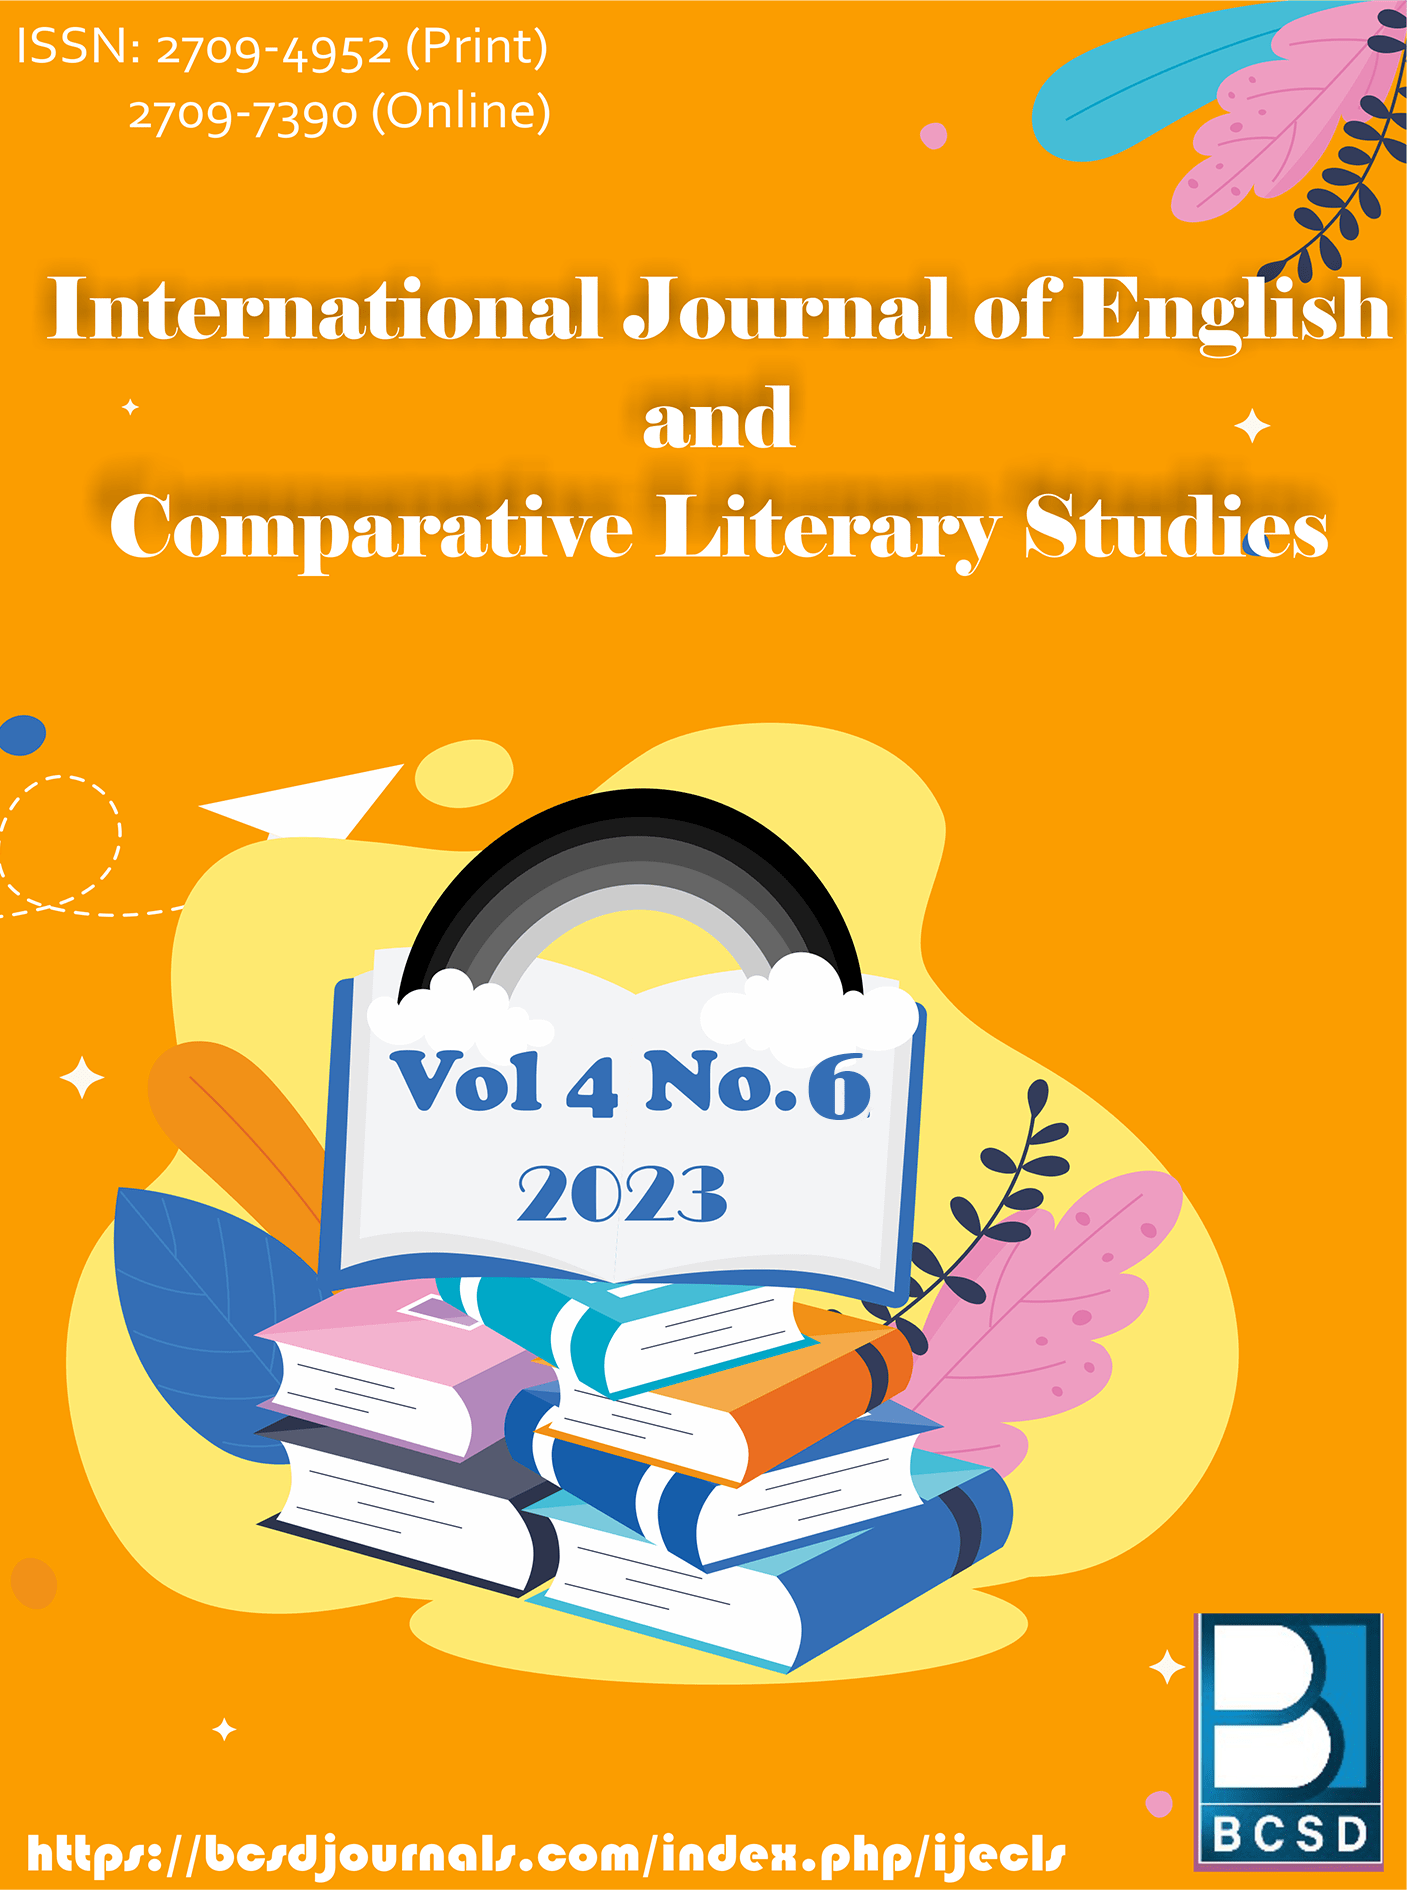 					View Vol. 4 No. 6 (2023): International Journal of English and Comparative Literary Studies 
				